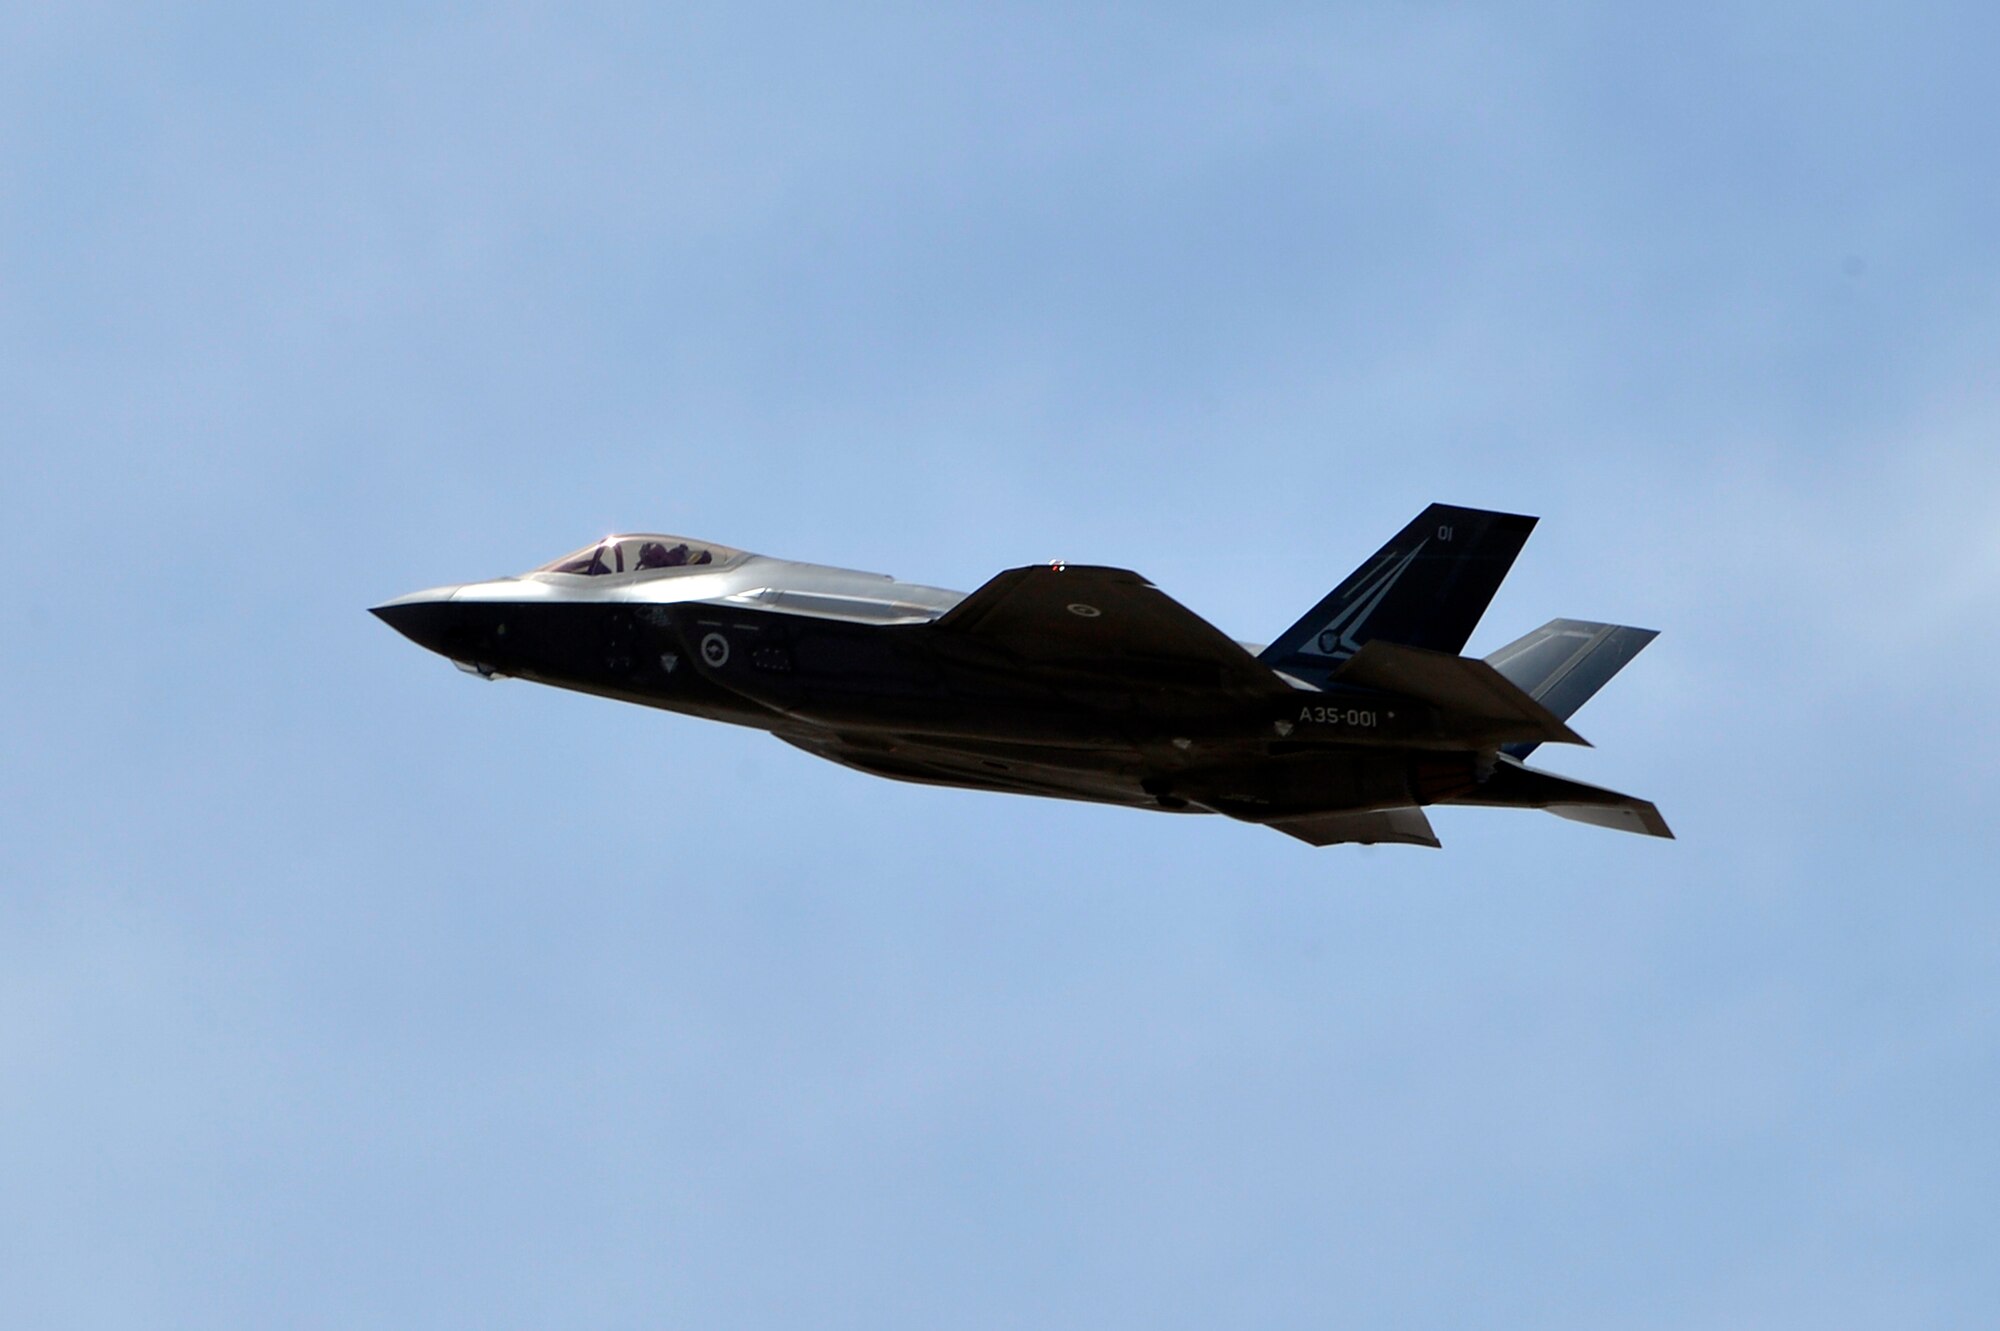 Royal Australian Air Force Maj. Andrew Jackson, 61st Fighter Squadron RAAF squadron leader, takes off in a RAAF F-35 A Lightning II at Luke Air Force Base, Arizona, May 14, 2015. This flight marks the first F-35 sortie for the RAAF. (U.S. Air Force photo by Senior Airman Devante Williams)